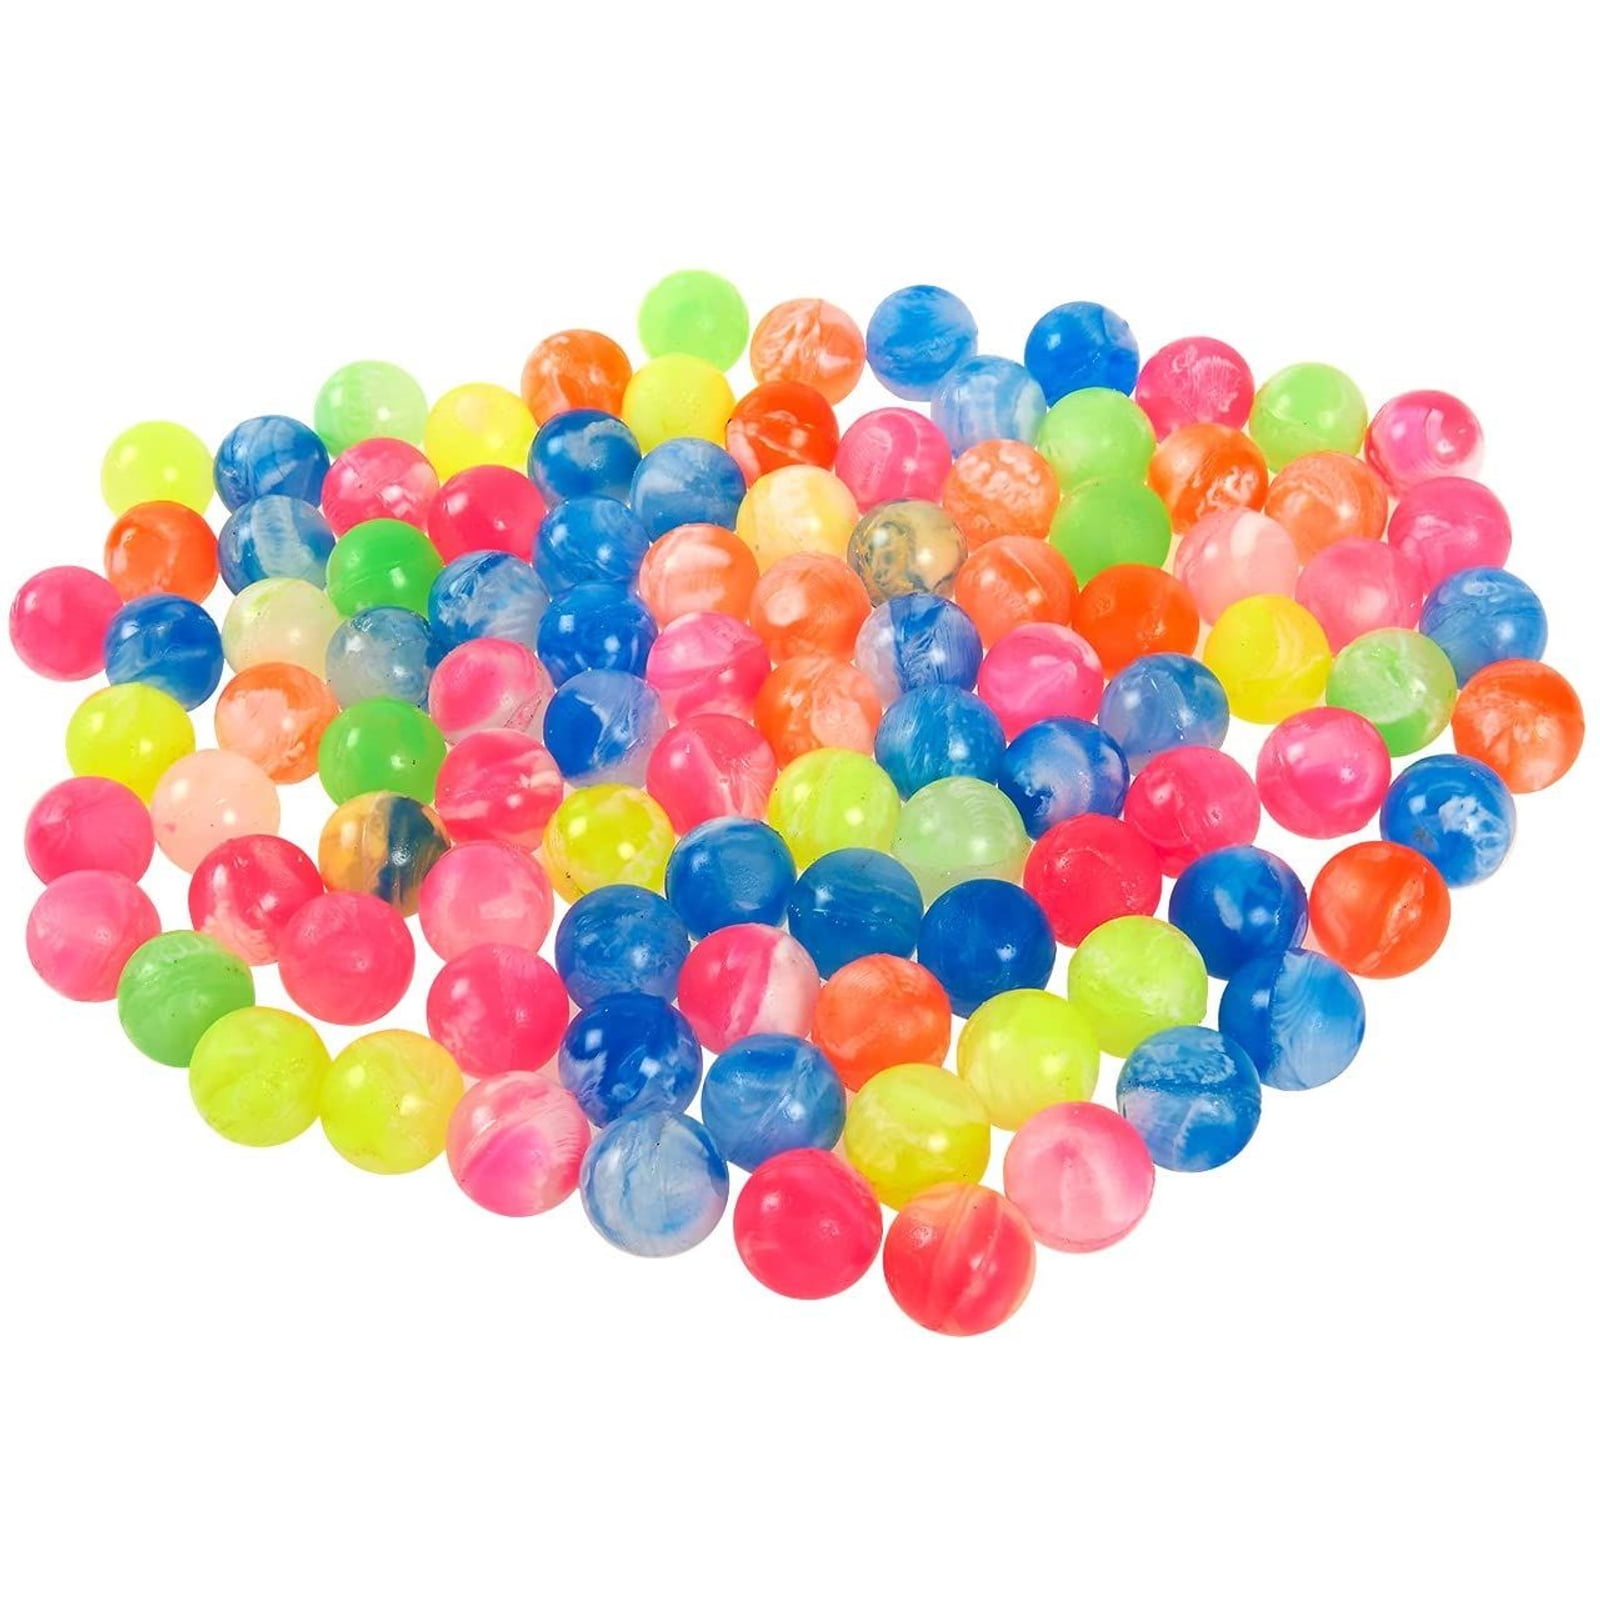 Unique Wow Party WOW Pack of 4 Foam Balls Party Bag Fillers Pack of 3 Balloons